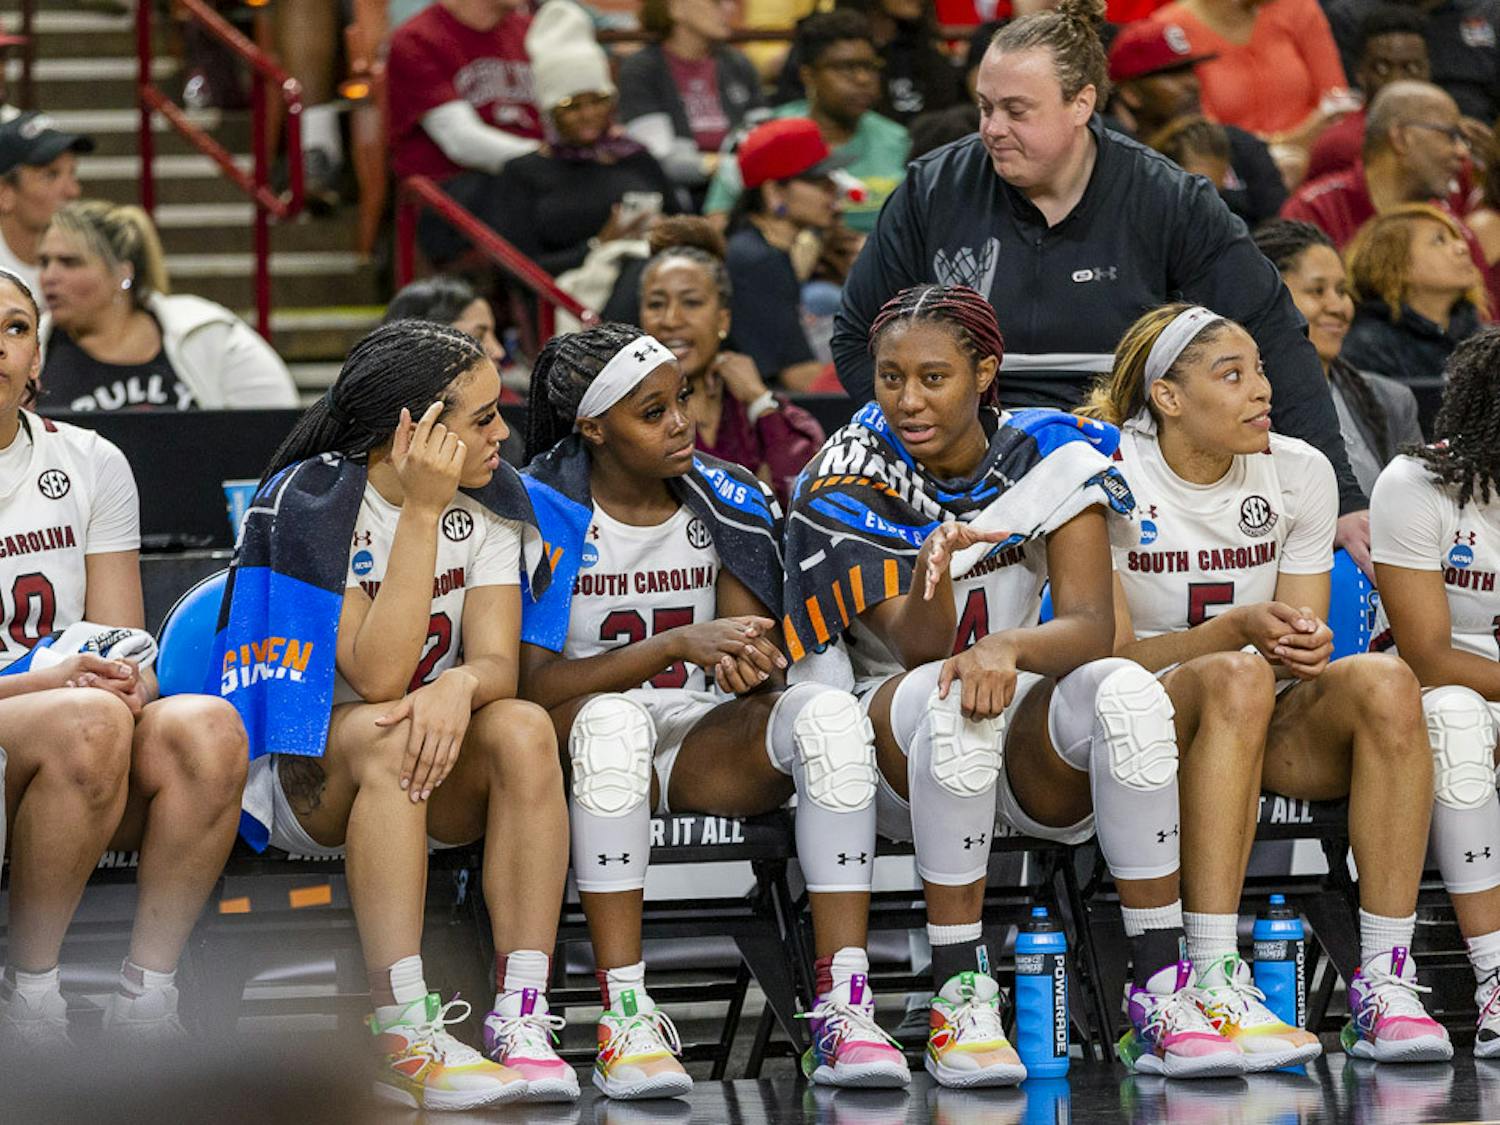 From left to right: Senior guard Brea Beal, redshirt freshman guard Raven Johnson and senior forward Aliyah Boston chat during the last couple minutes of the match against UCLA at Bon Secours Wellness Arena in Greenville, South Carolina, on March 25, 2023. The Gamecocks beat the Bruins 59-43.